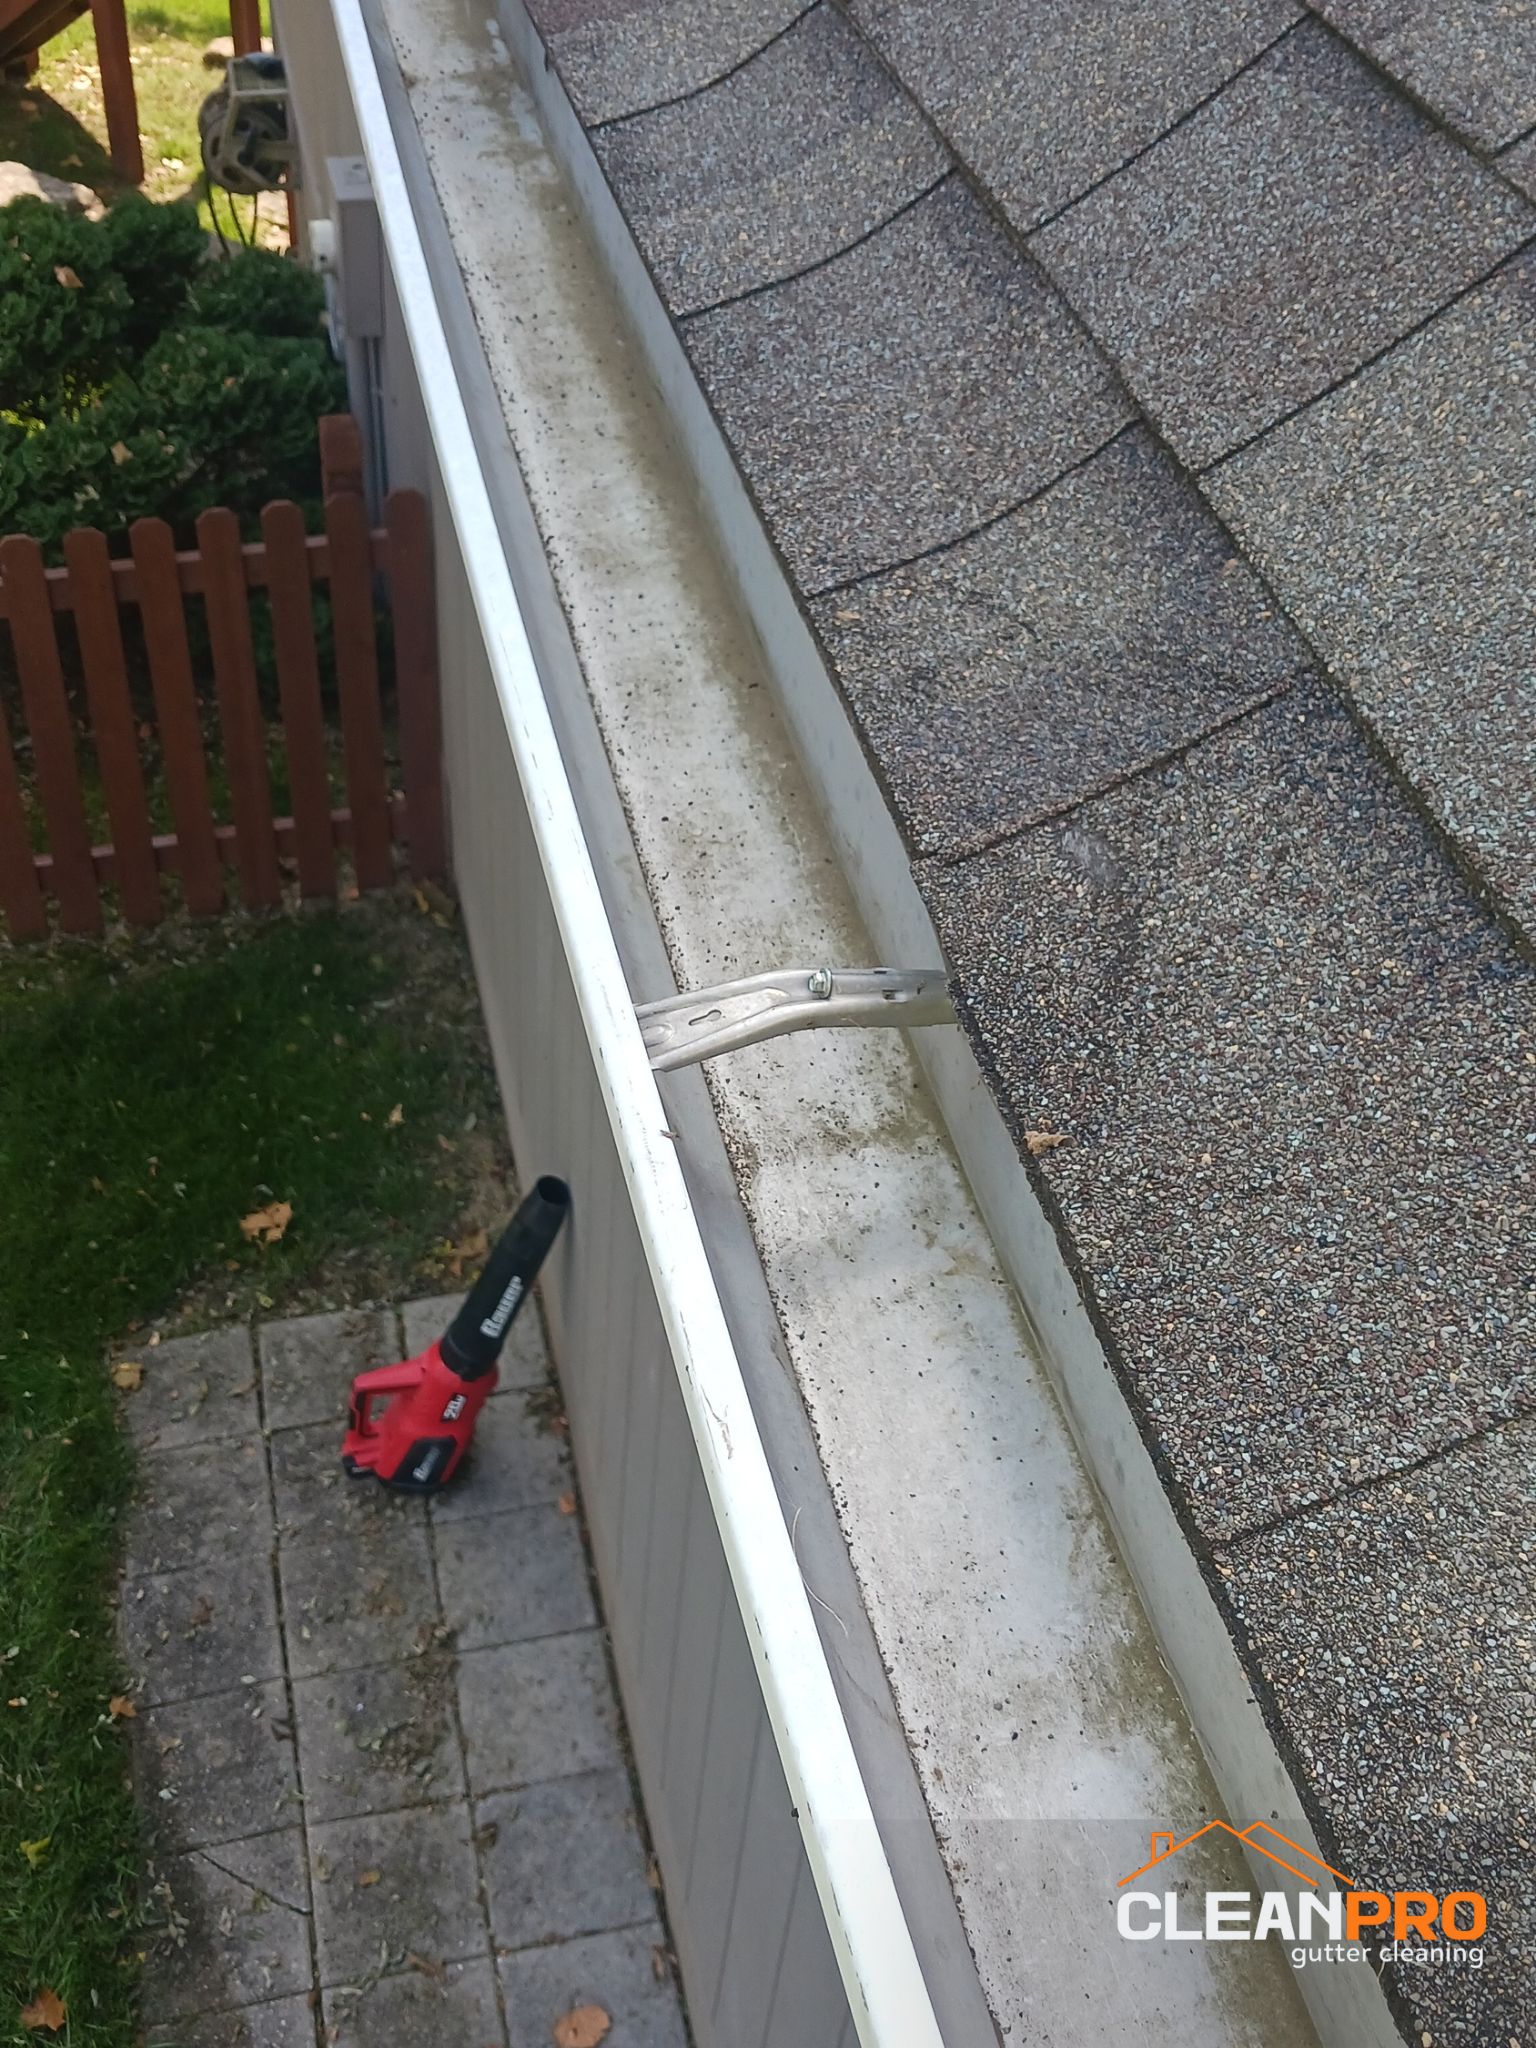 Quality Gutter Cleaning in Naples FL